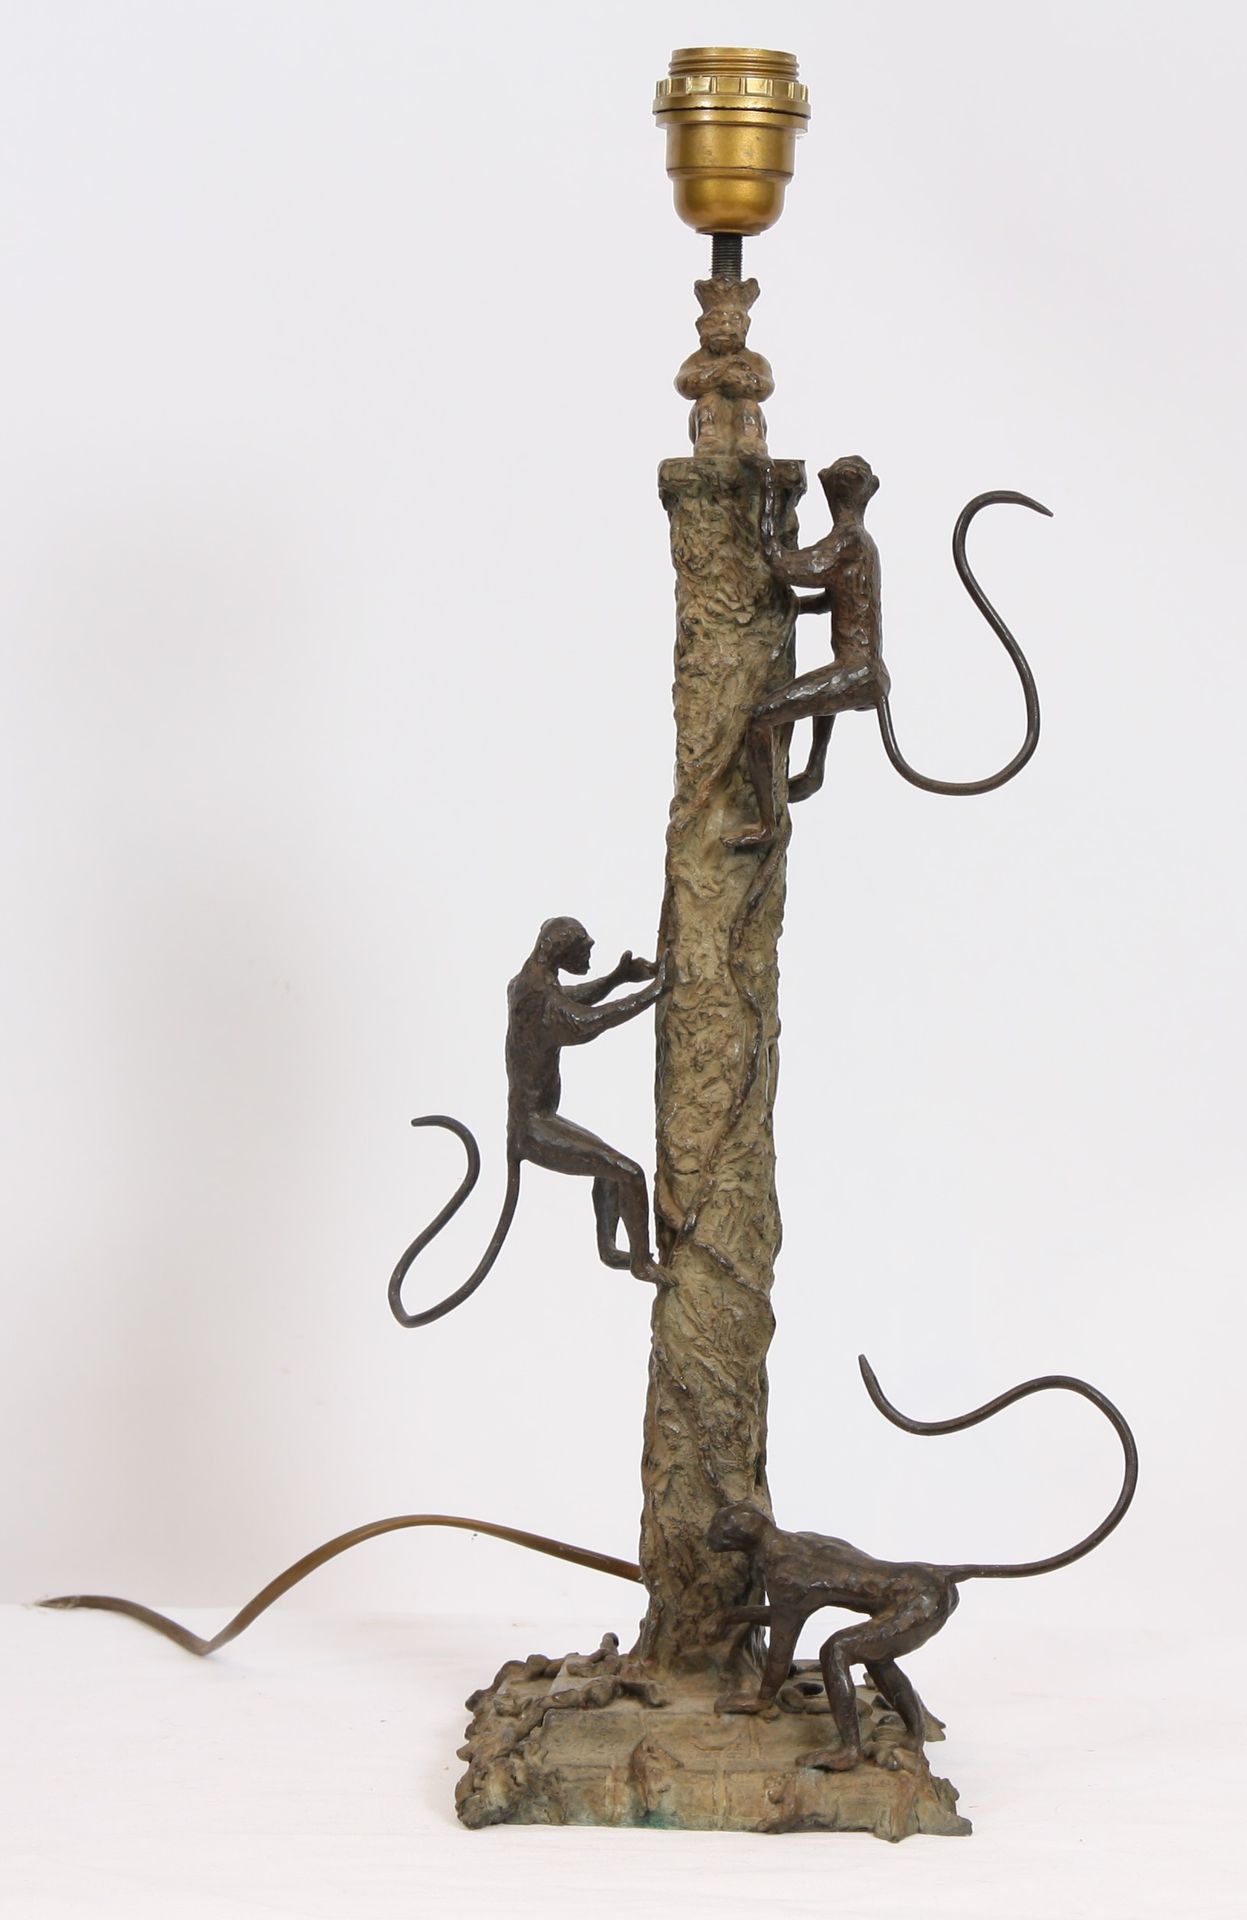 Null LAMP "AUX SINGES" by Yann TORCHET (born in 1961)

Patinated bronze, monogra&hellip;